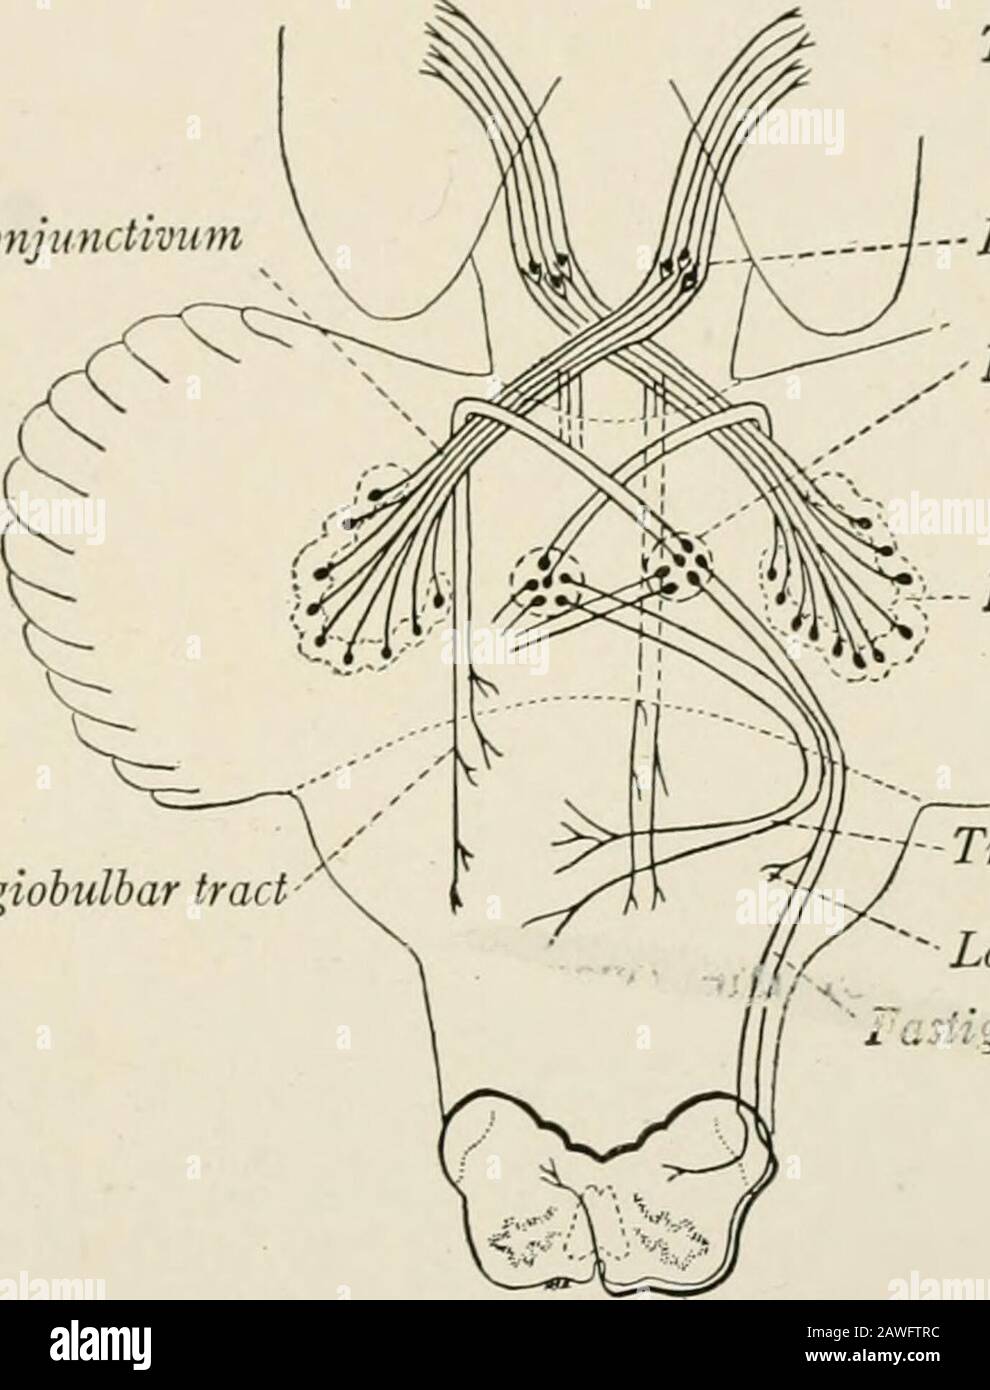 The anatomy of the nervous system, from the standpoint of development and function . rtex by way of the pons, which probably set thecoordinating cerebellar mechanism into activity to bring about the properadjustment of voluntary movements. For additional details concerning thefunctions of the cerebellum the reader should consult the recent paper byHolmes (1917). THE CKKKHKLLl.M 211 THE EFFERENT CEREBELLAR TRACTS The efferent cerebellar tracts arise in the central nuclei. It is probable thatno fibers of cortical origin leave the cerebellum except, perhaps, some to Deitersnucleus (Clarke and Hor Stock Photo